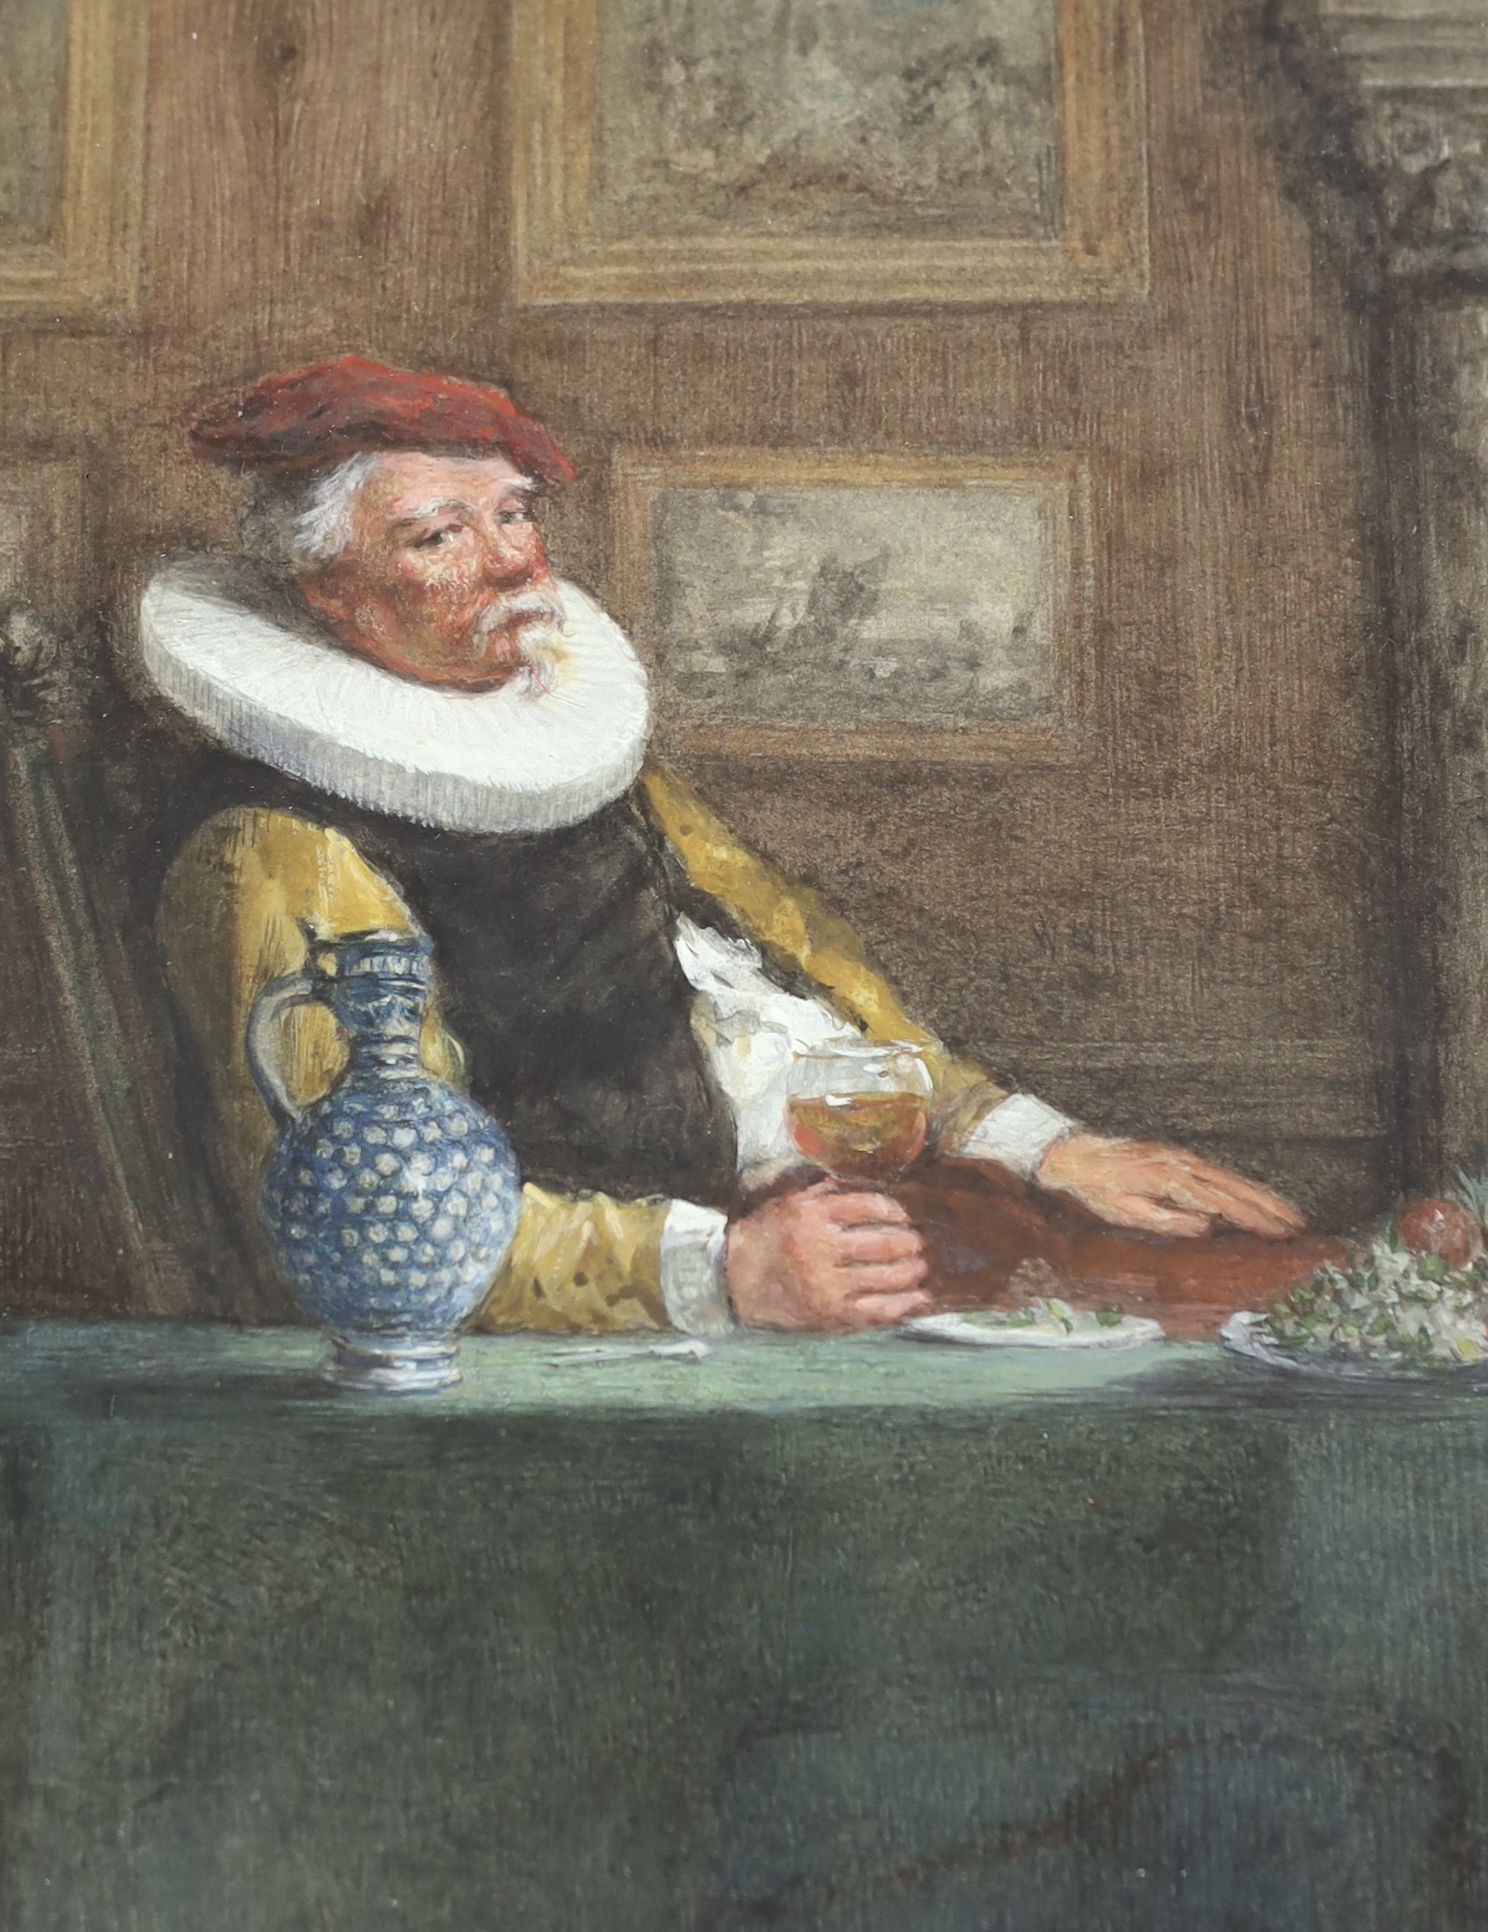 19th century Continental School, watercolour, 15th century gentleman seated at a table, 20 x 15cm